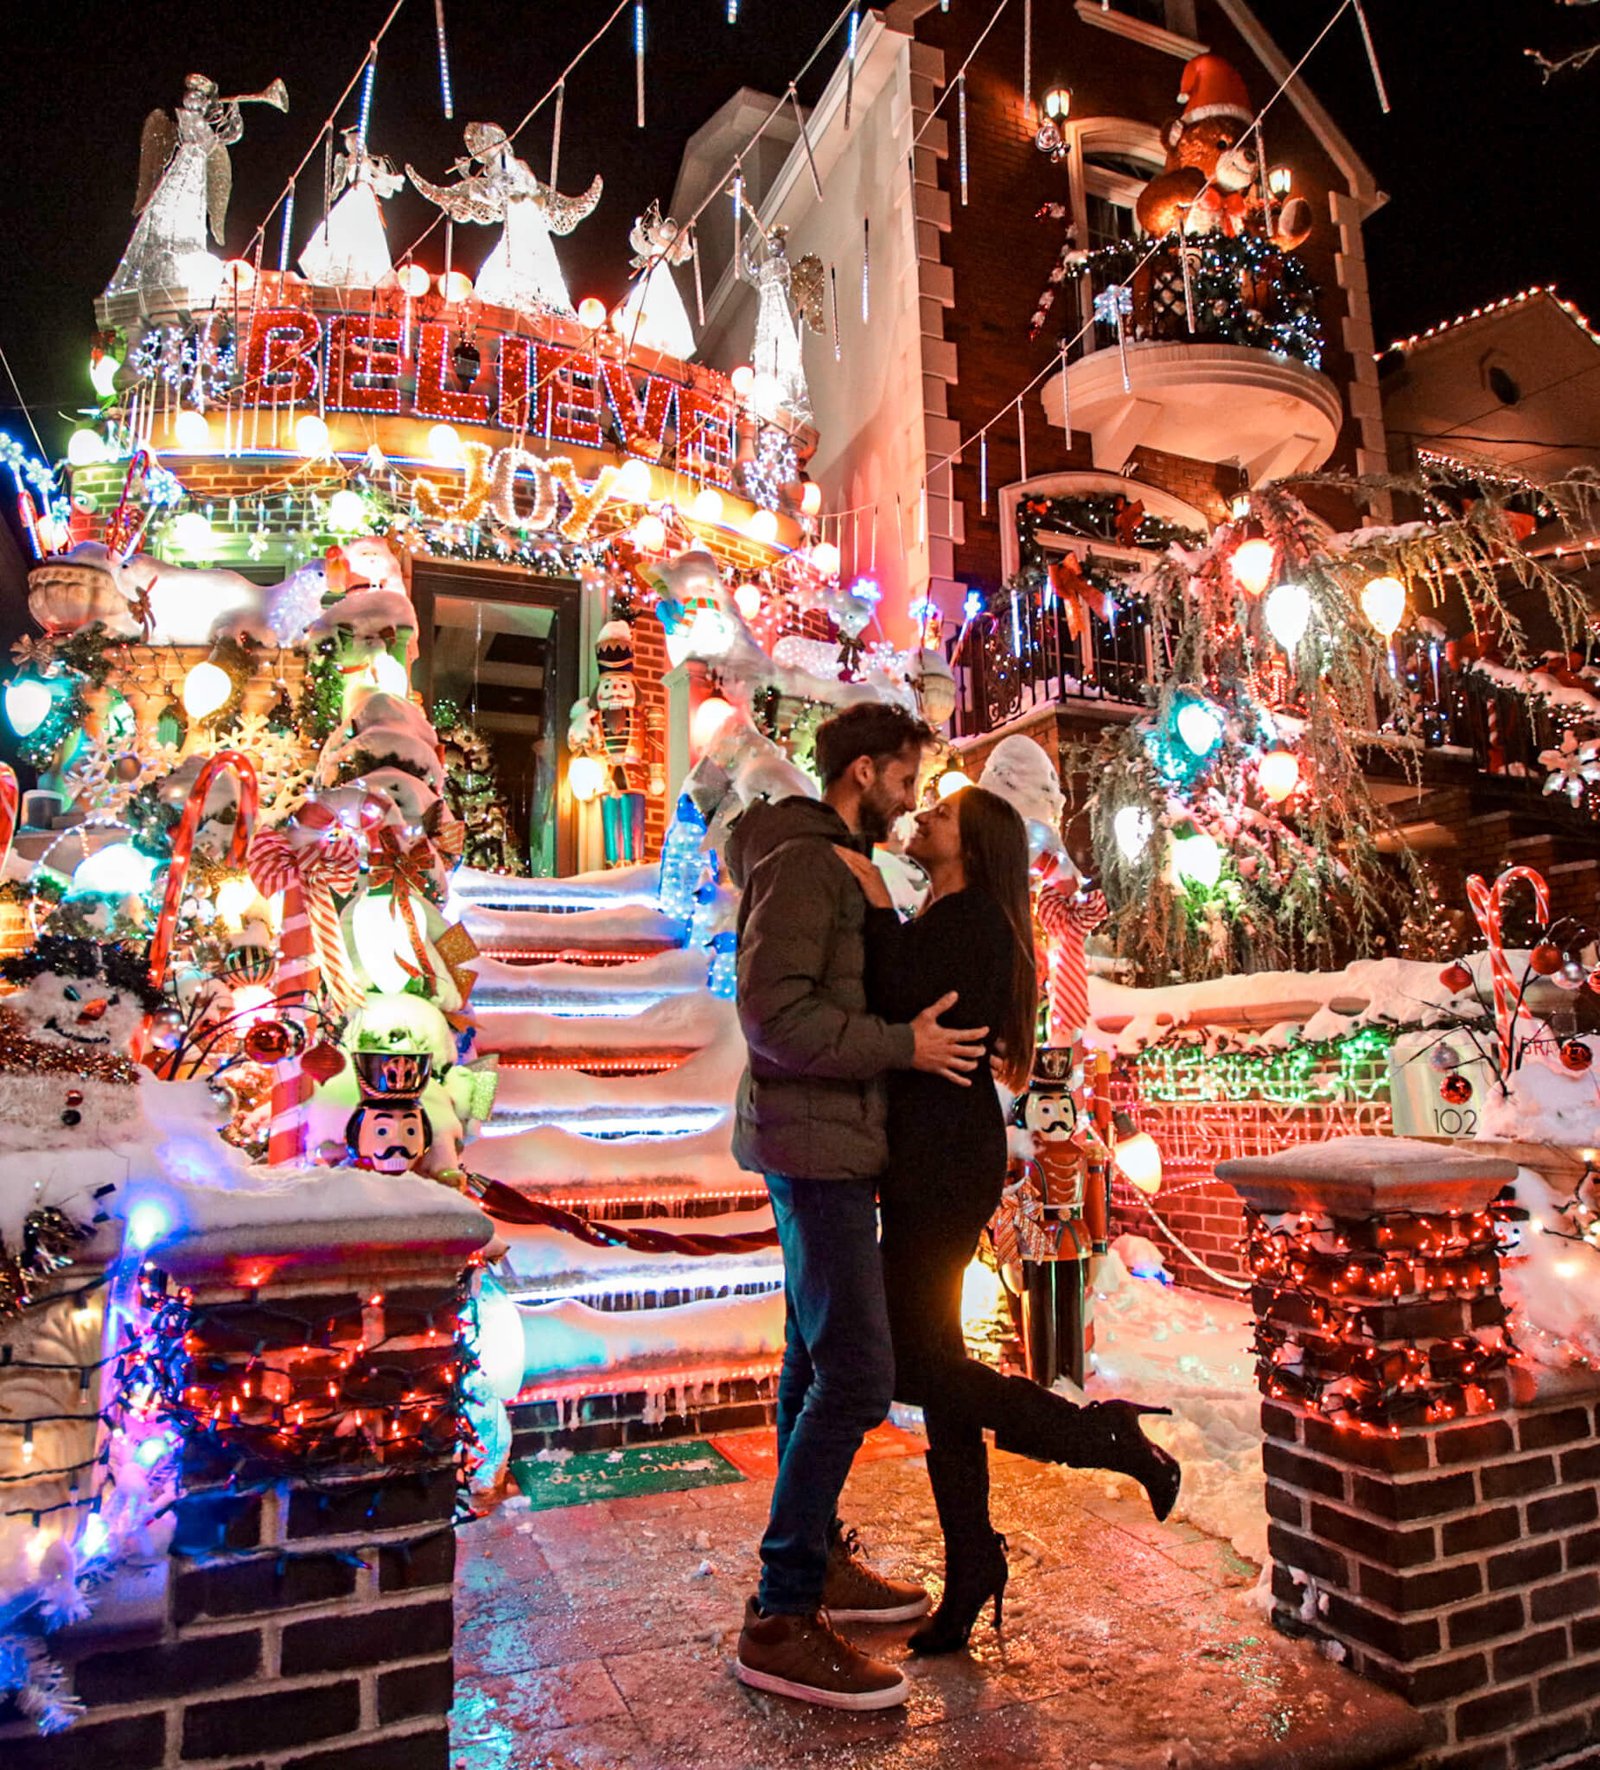 Dyker Heights, things to do in December in New York